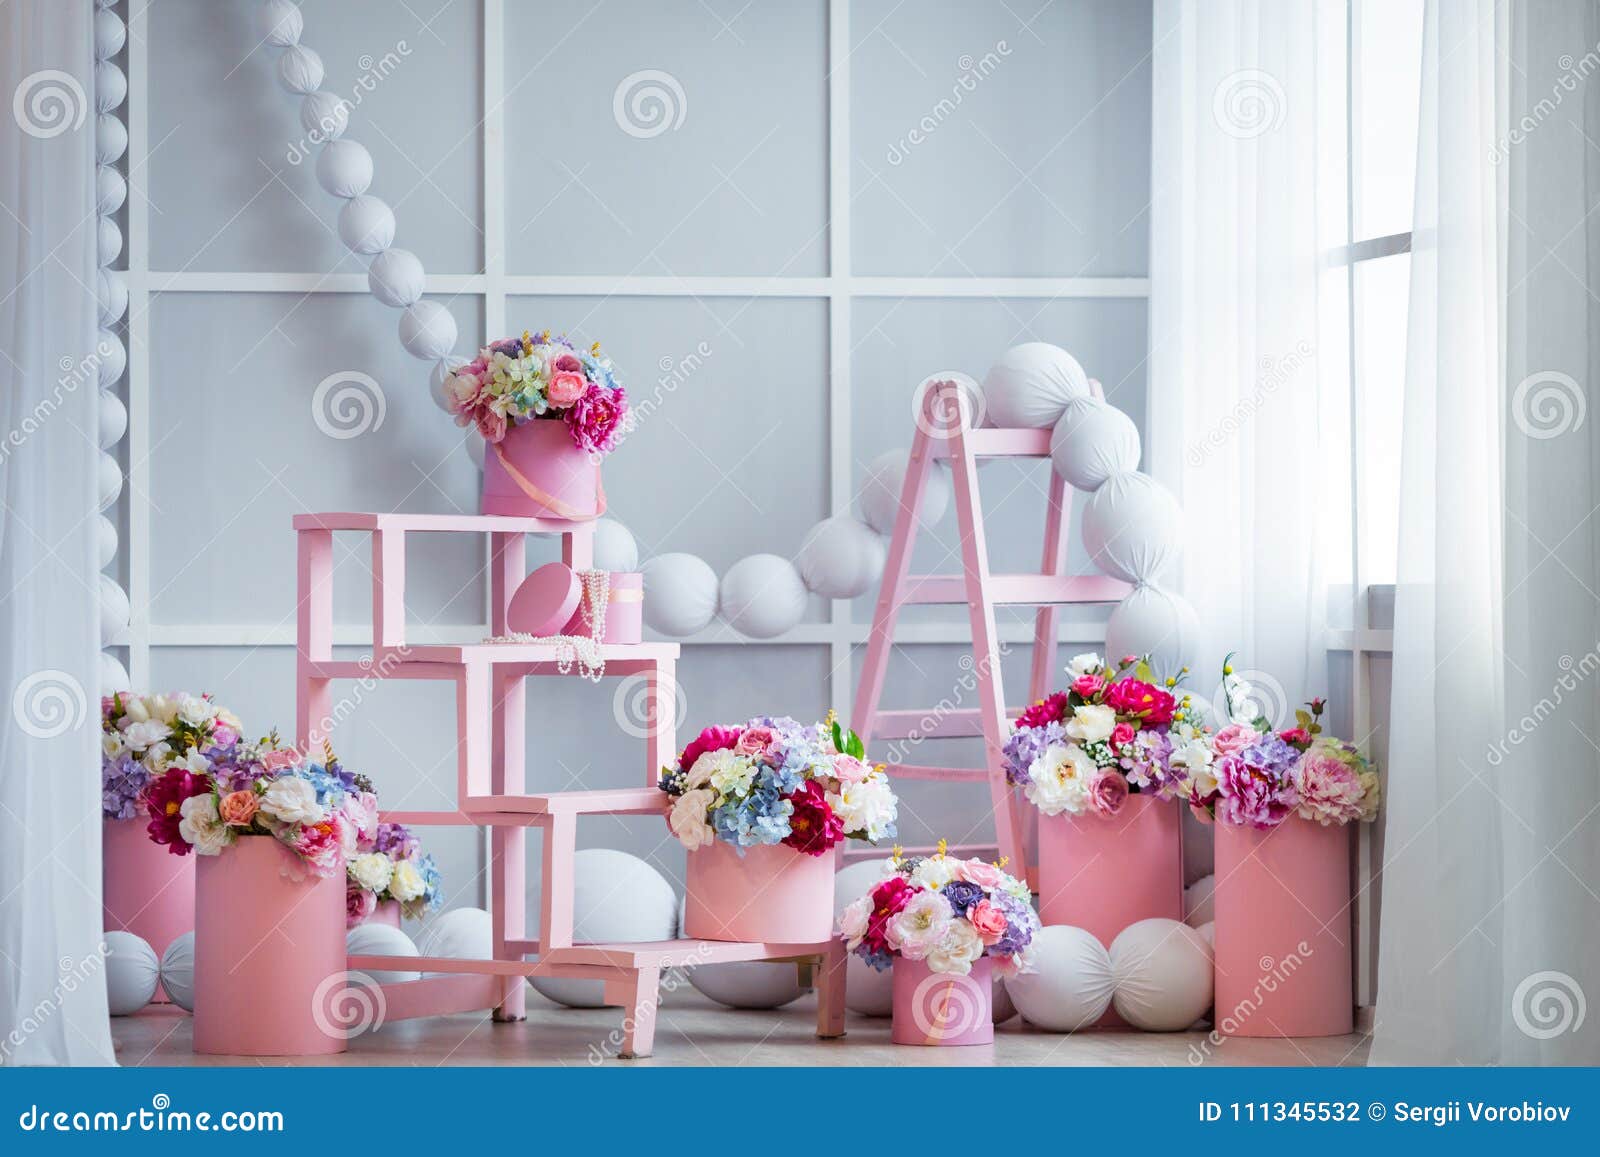 interior  of room decorated with beautiful flowers